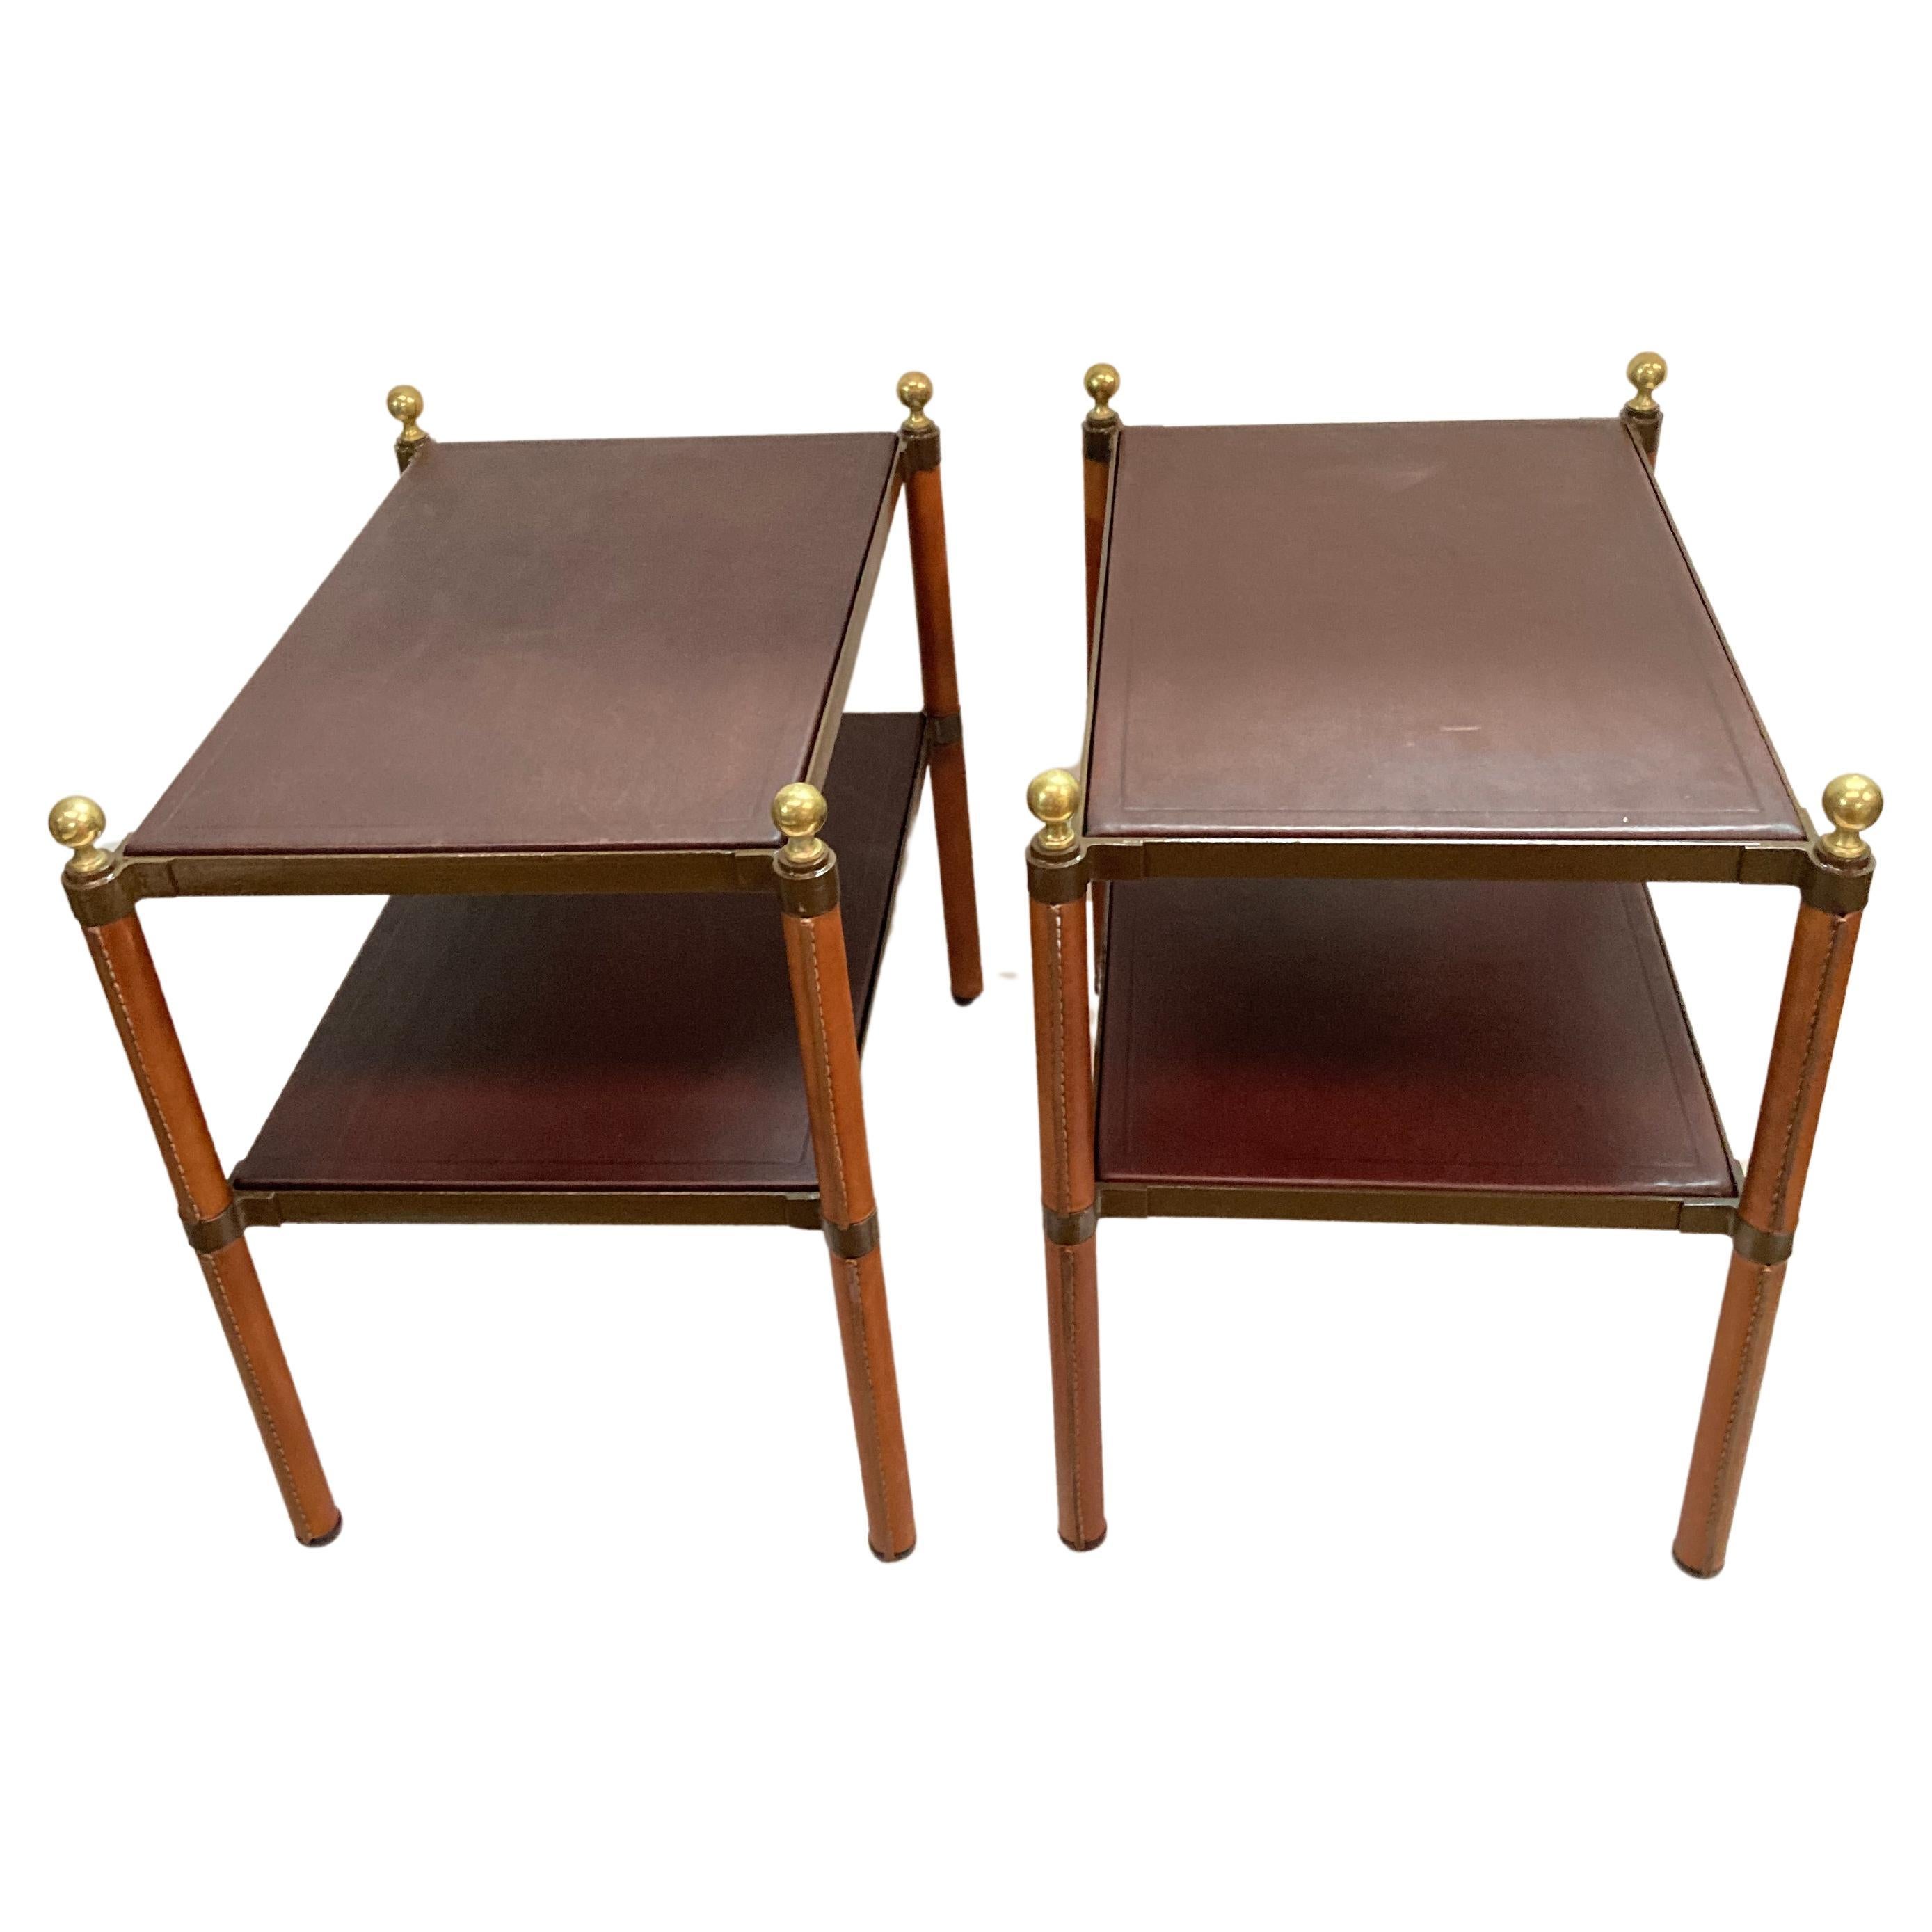 Pair of stitched leather tables by Jacques Adnet For Sale